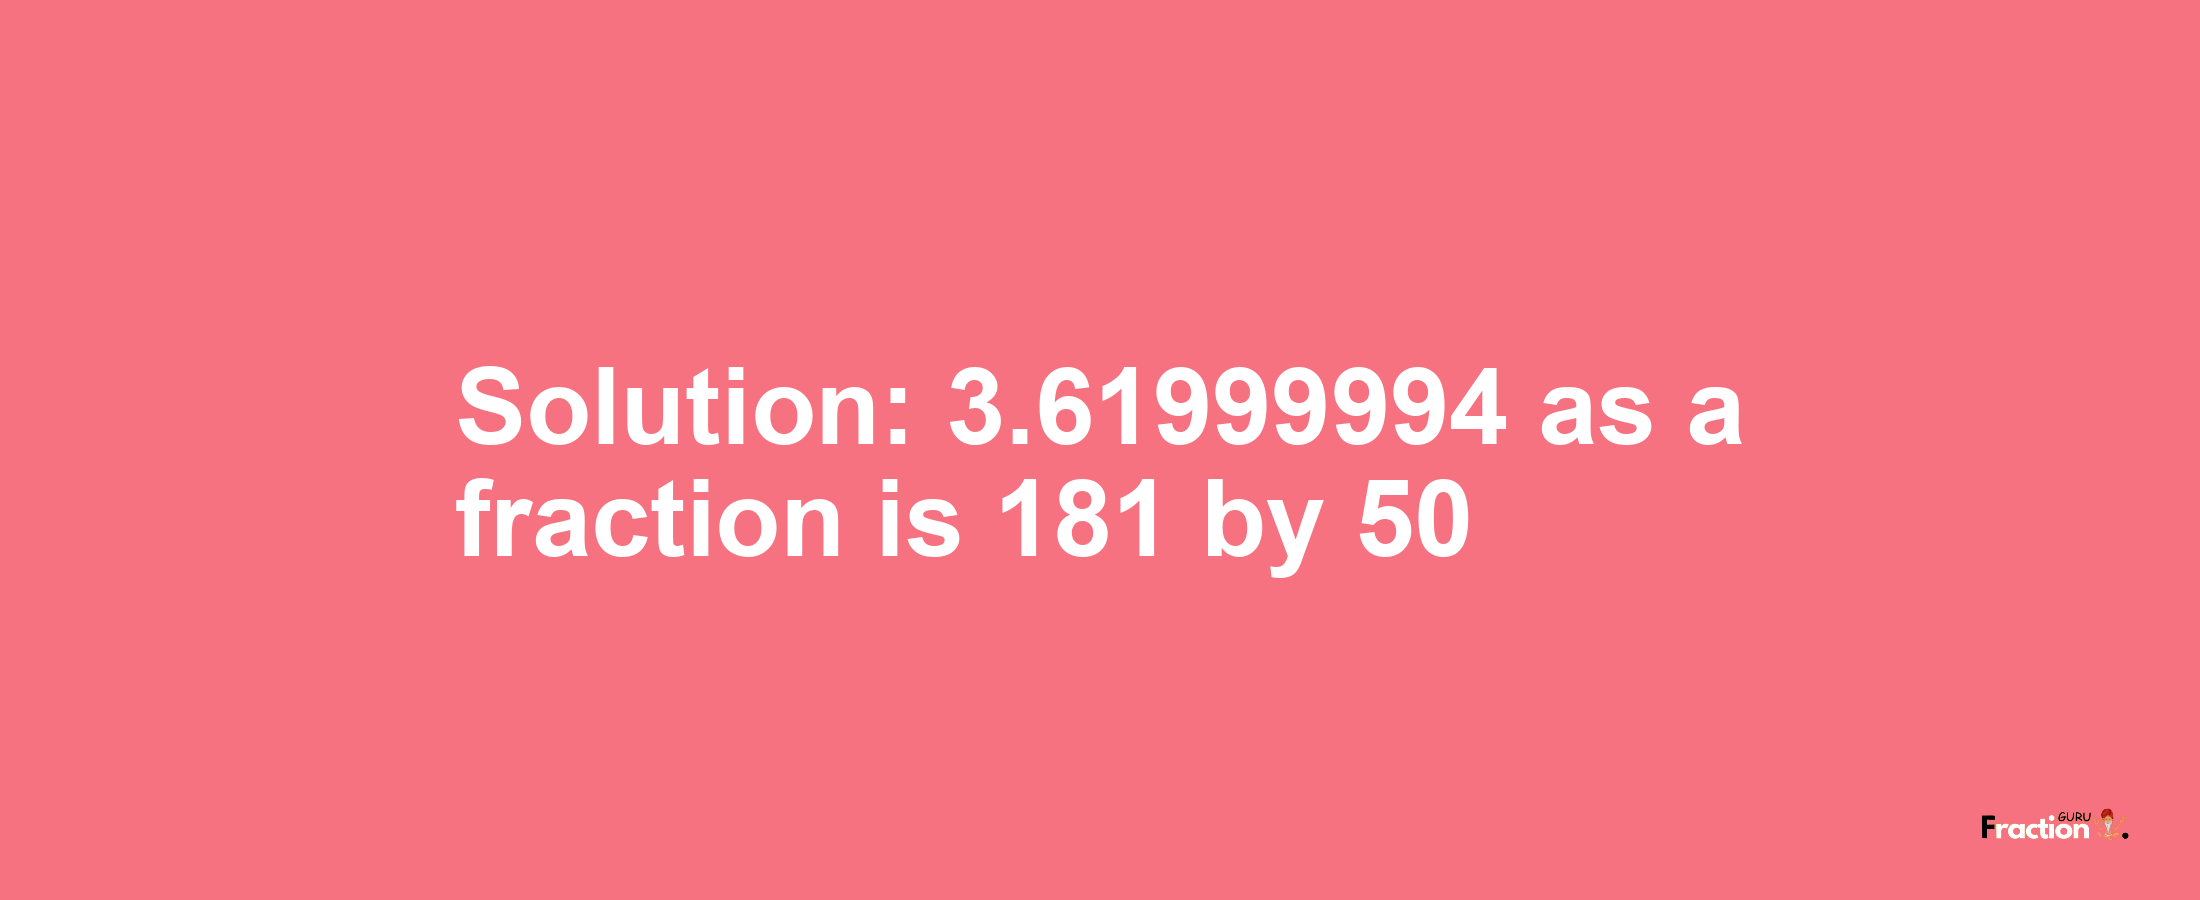 Solution:3.61999994 as a fraction is 181/50